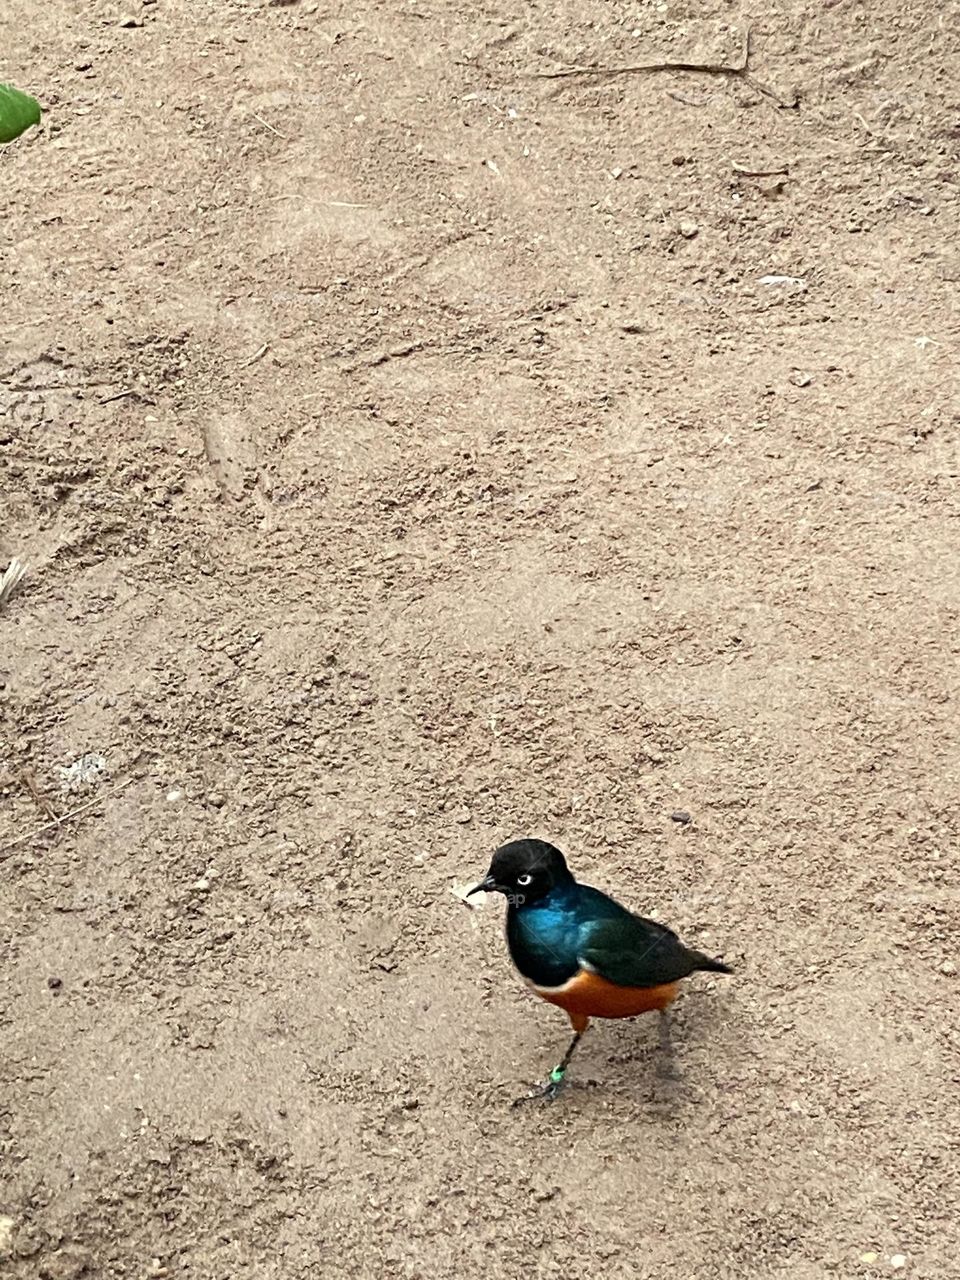 A blue and tan bird running in sandy dirt with a prized piece of food in its beak. It looked like a bird on a mission. Taken at Cape May Zoo & Park in Cape May, NJ. 